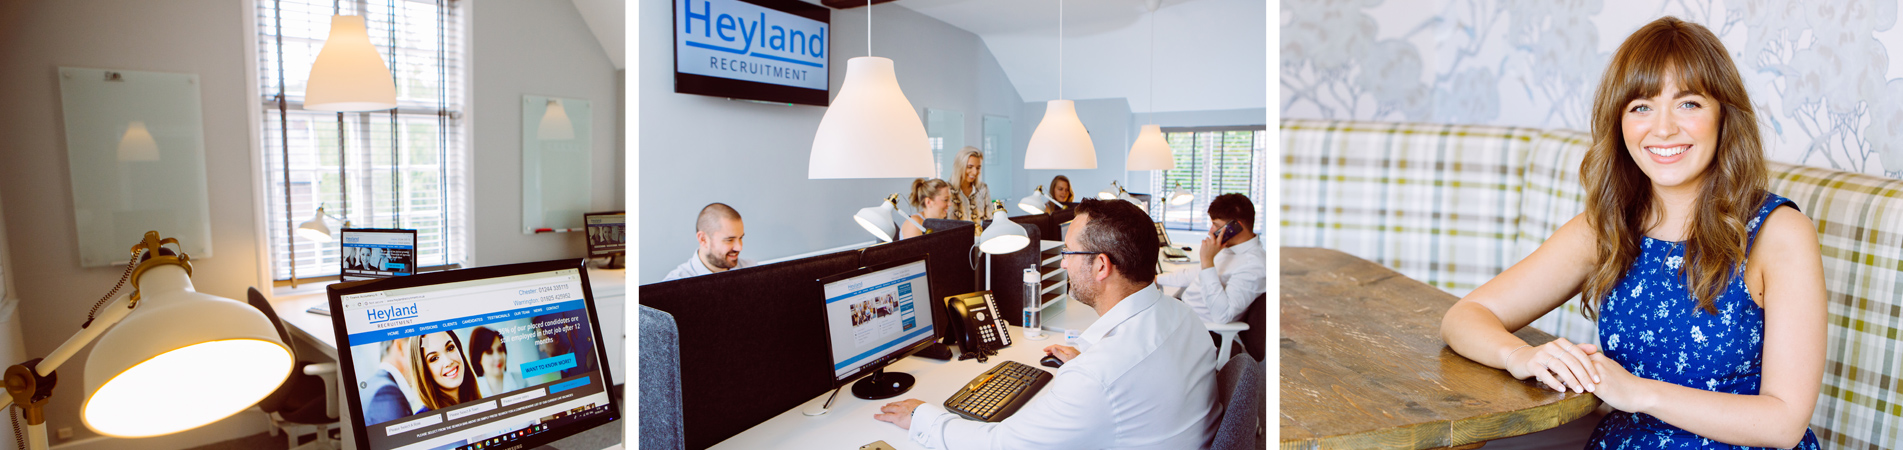 Introducing Heyland Recruitment, our latest recruit